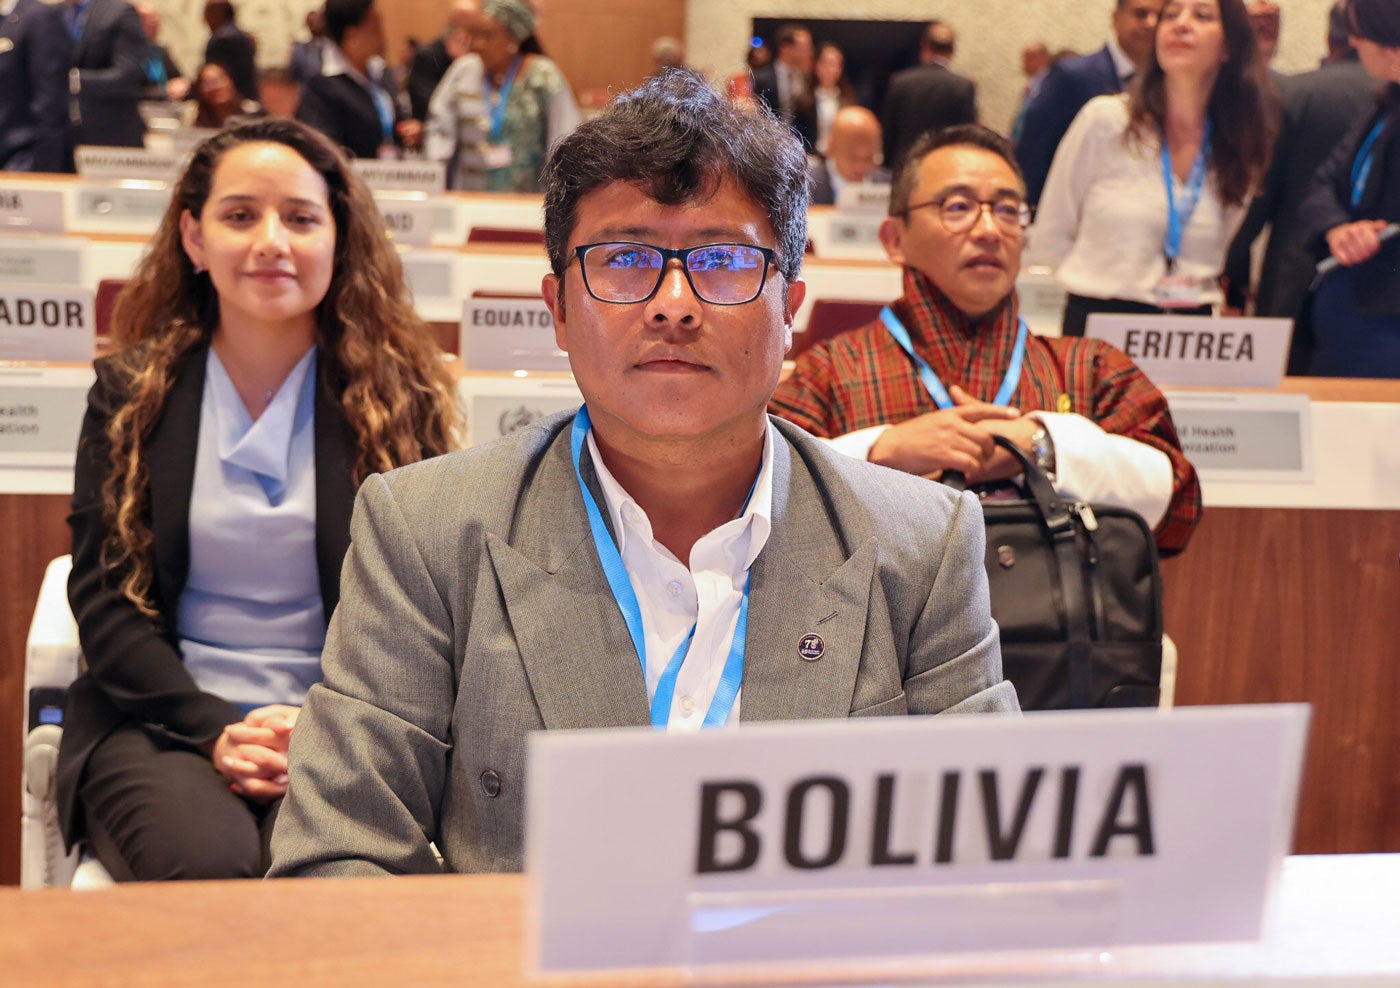 Ministry of Health and Sports of the Plurinational State of Bolivia, Dr. Vladimir Choquevillca